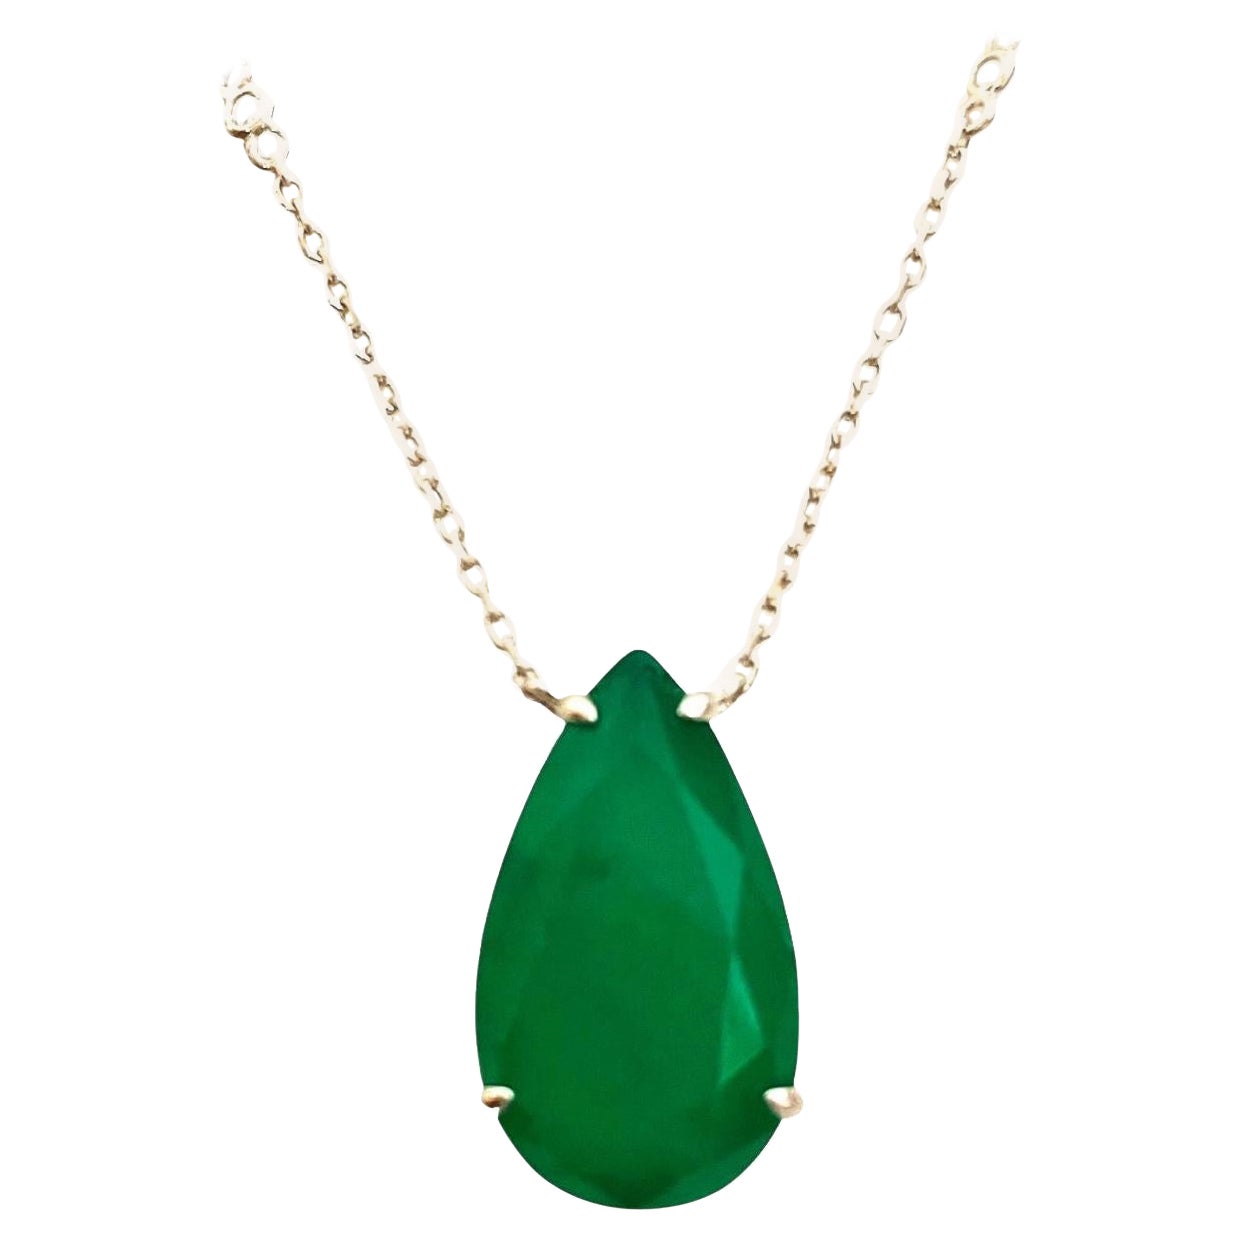 New Natural Forest Green Aventurine Doublet Sterling Necklace and Pendant For Sale